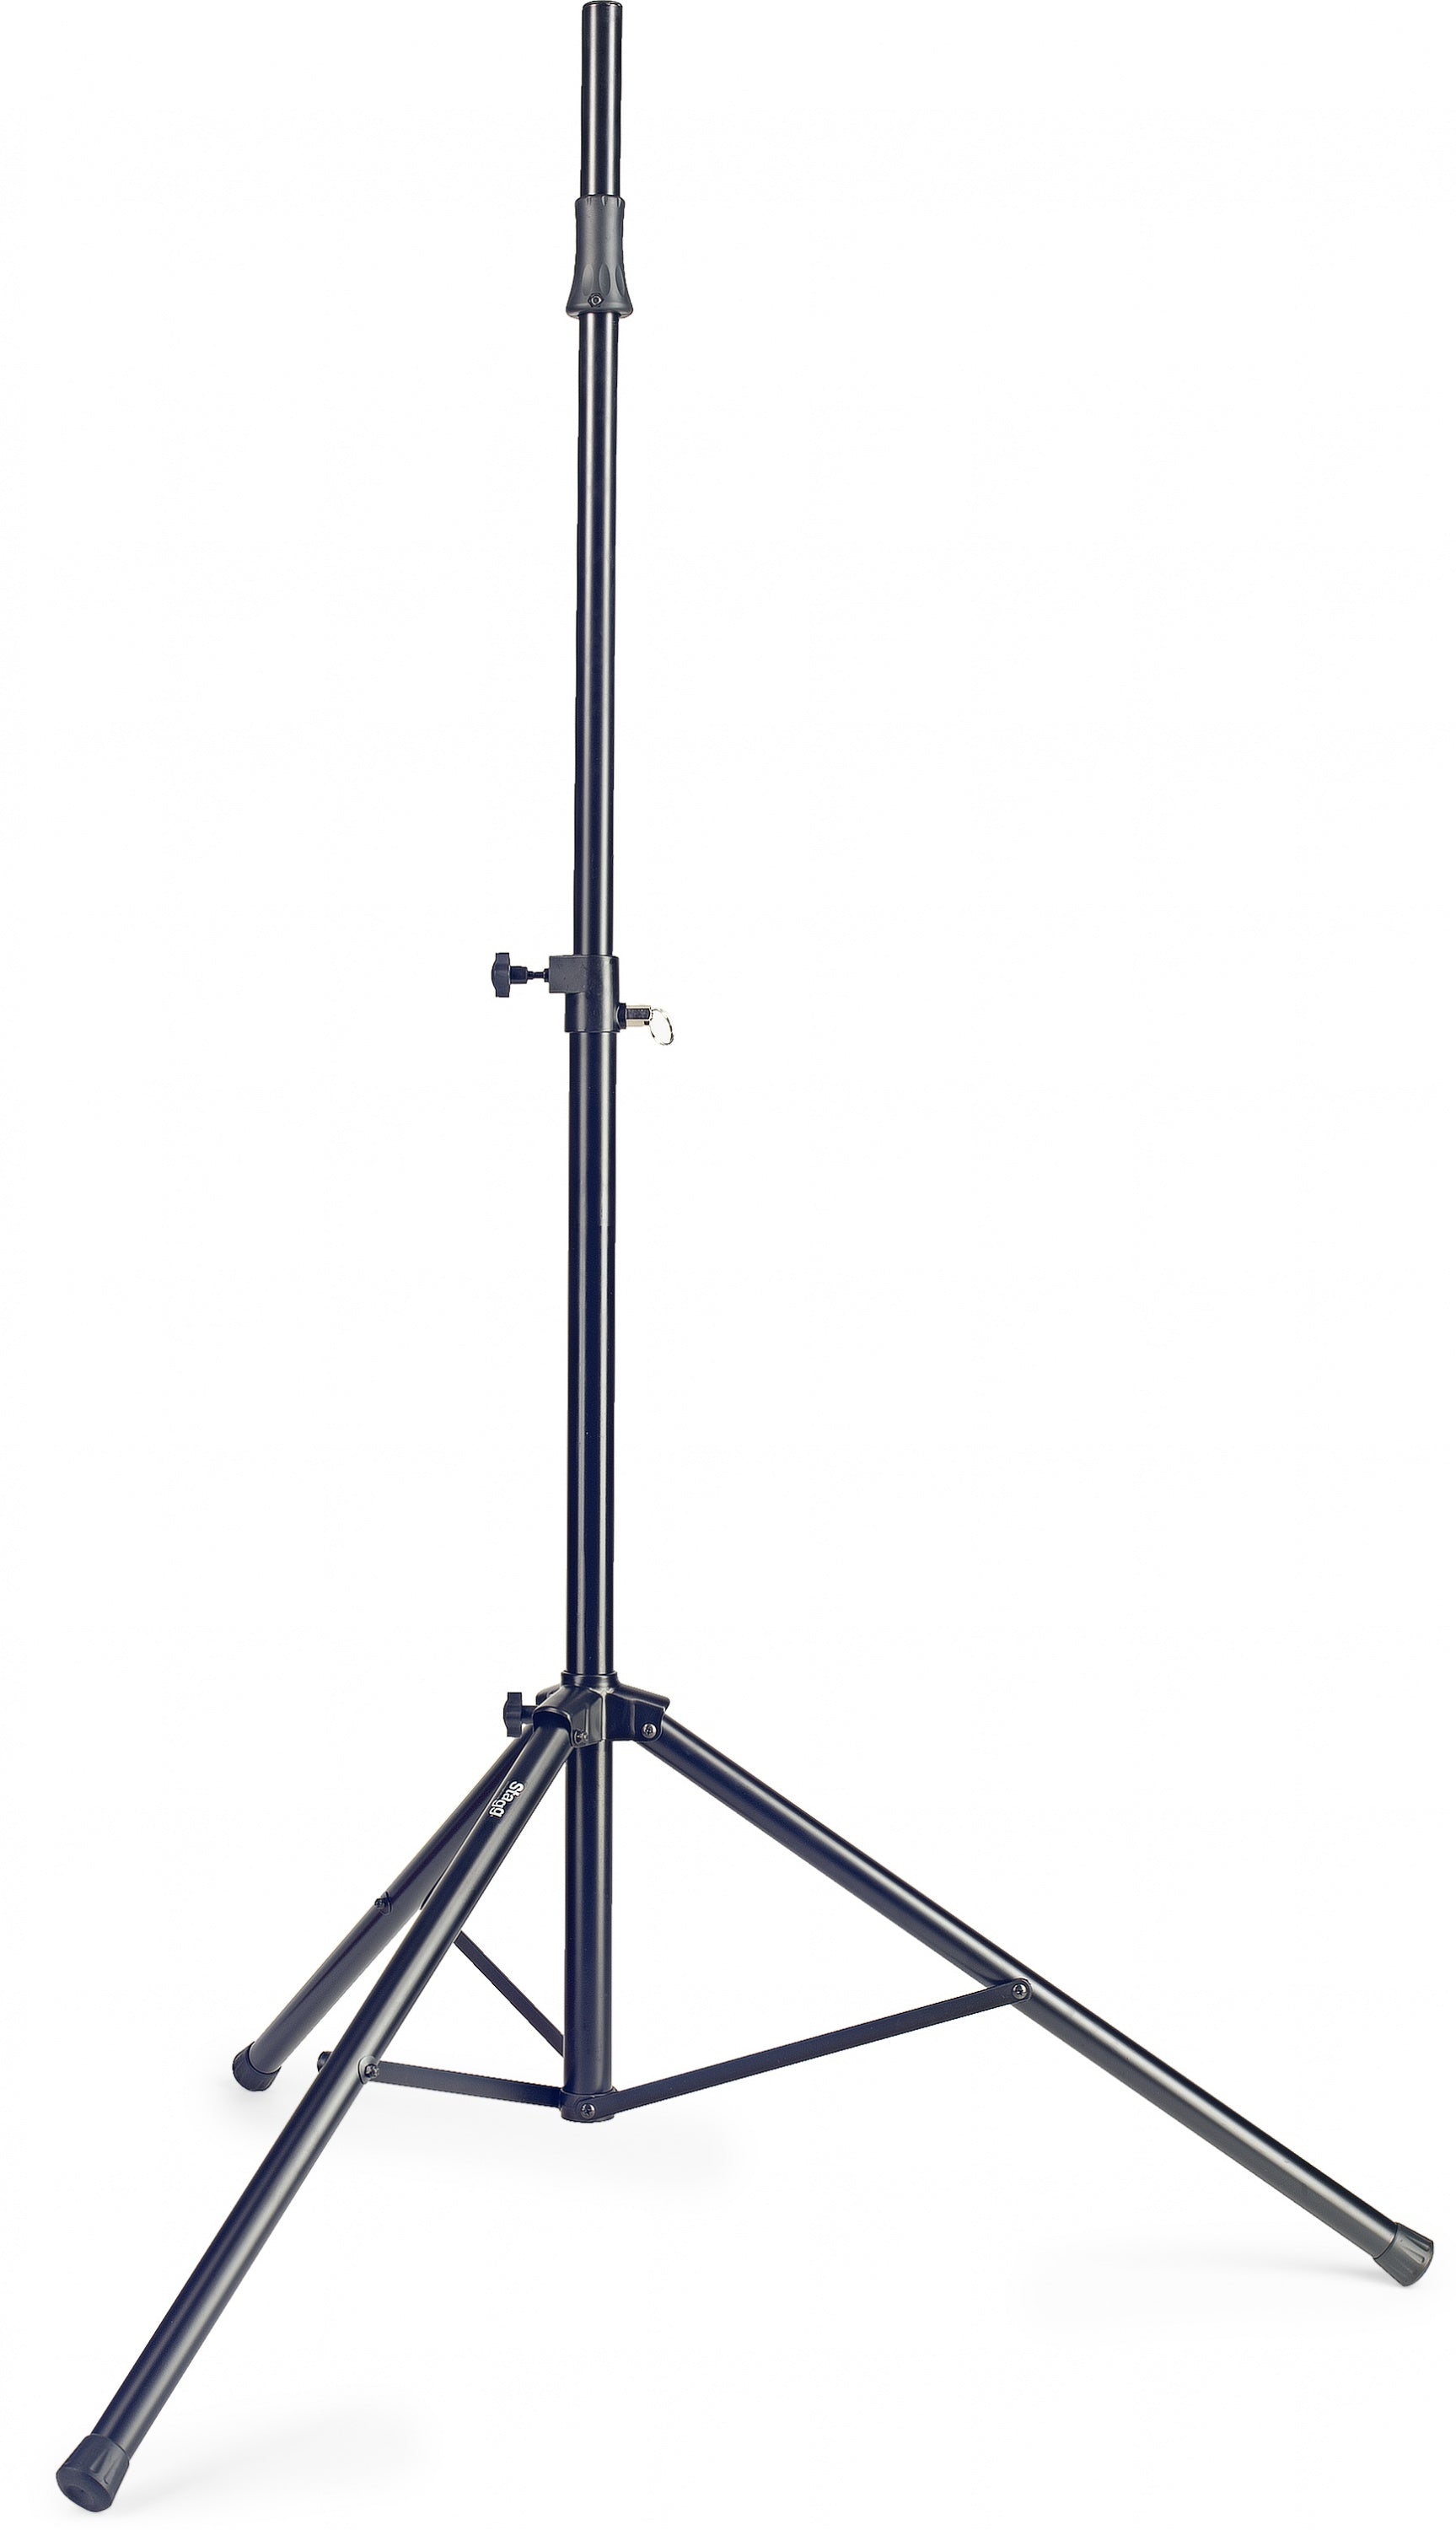 STAGG SPS90-ST LFT Hydraulic powered speaker stand (each)